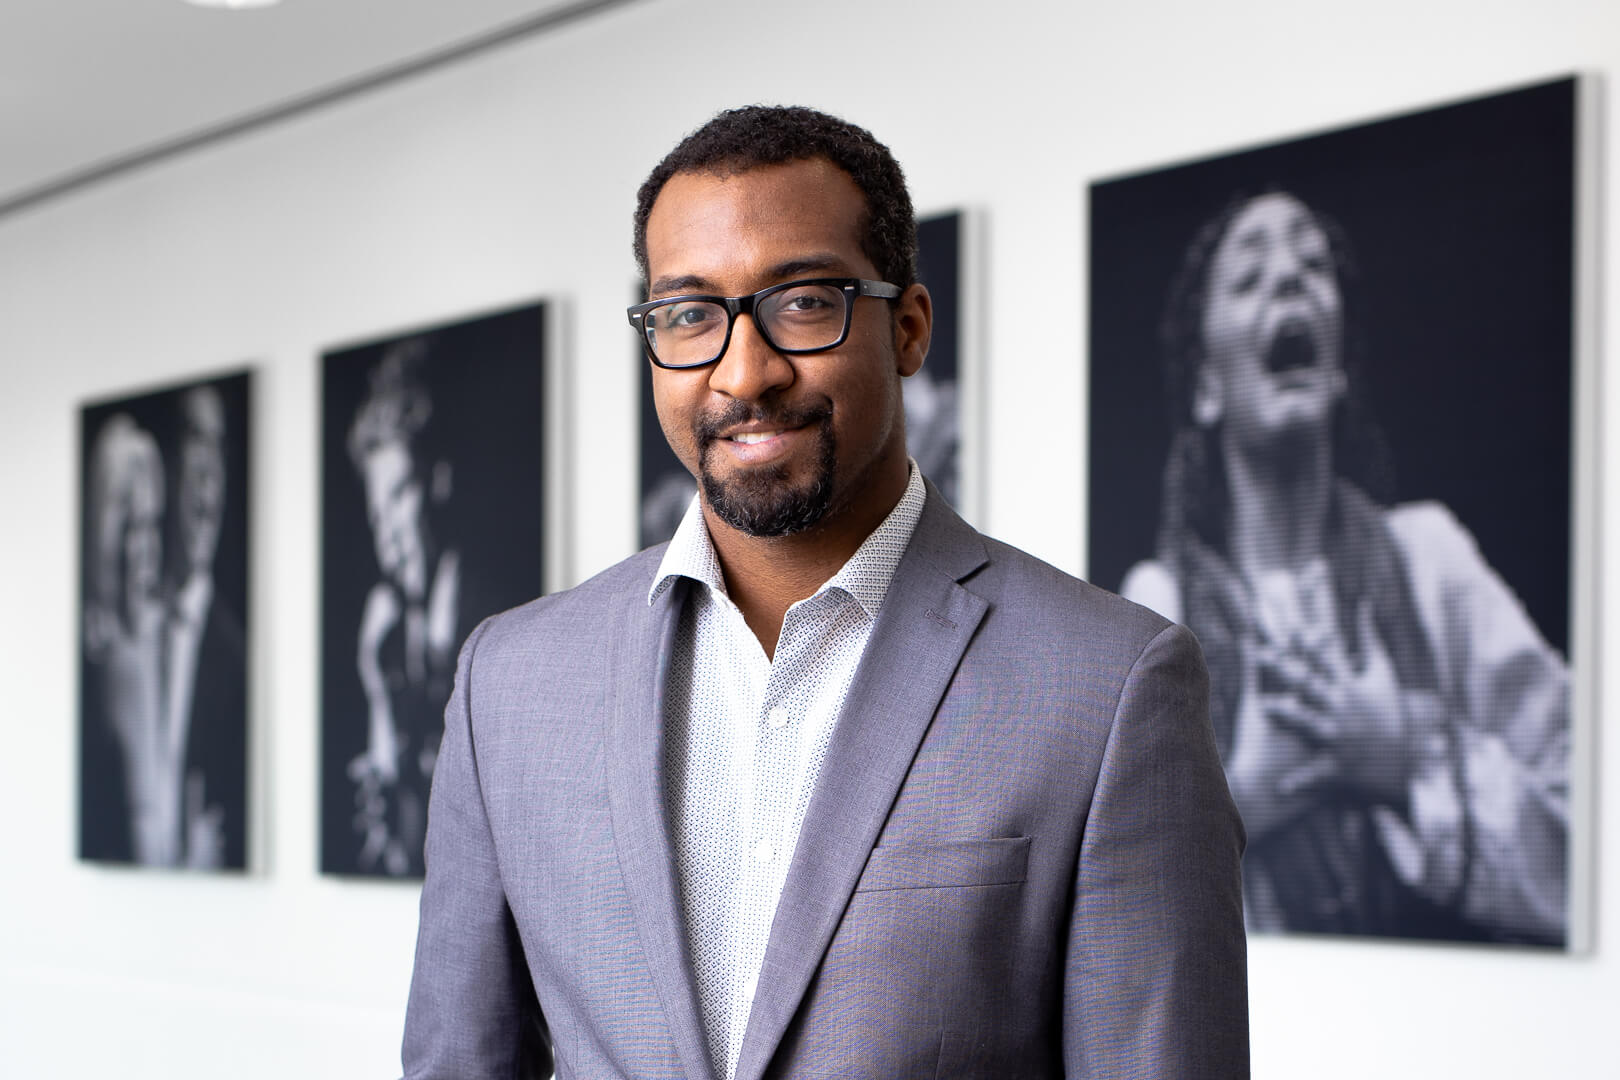 Shenandoah Names Assistant Provost for Inclusion, Diversity, and Equity Dr. Hakeem Leonard Will Work With Faculty, Deans to Encourage Anti-Racist, Anti-Oppressive Curricula